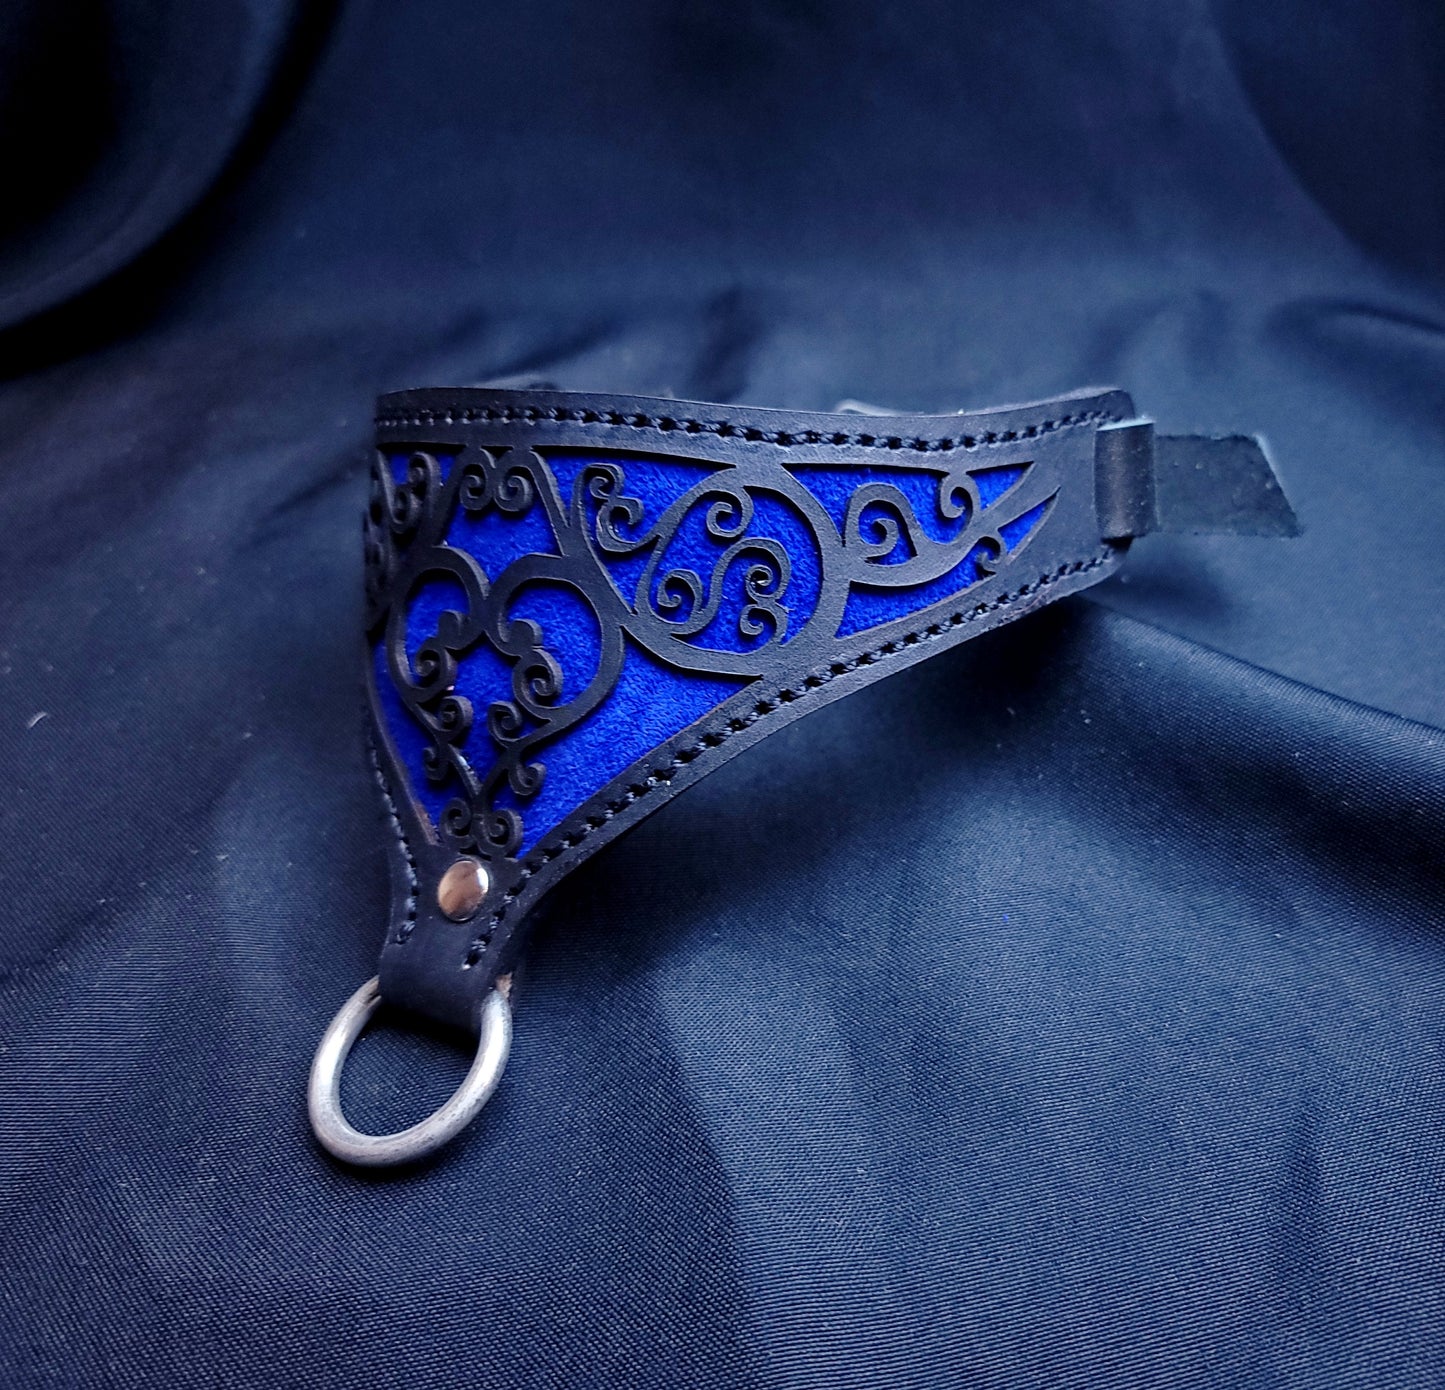 Blue Heart Filigree Collar - Made to Order